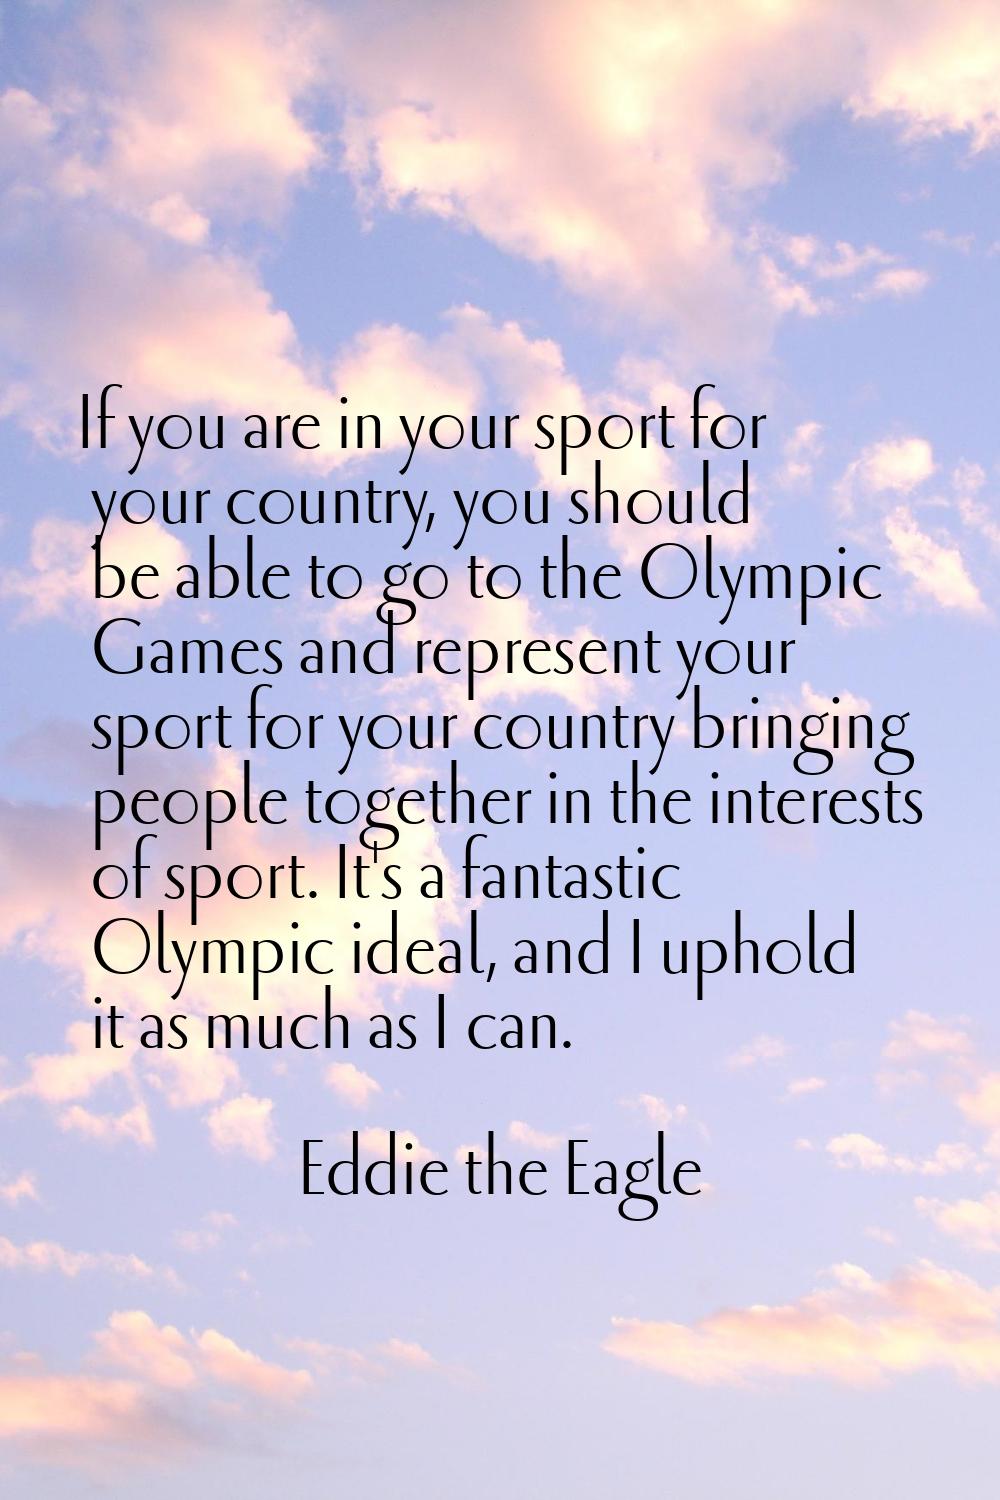 If you are in your sport for your country, you should be able to go to the Olympic Games and repres